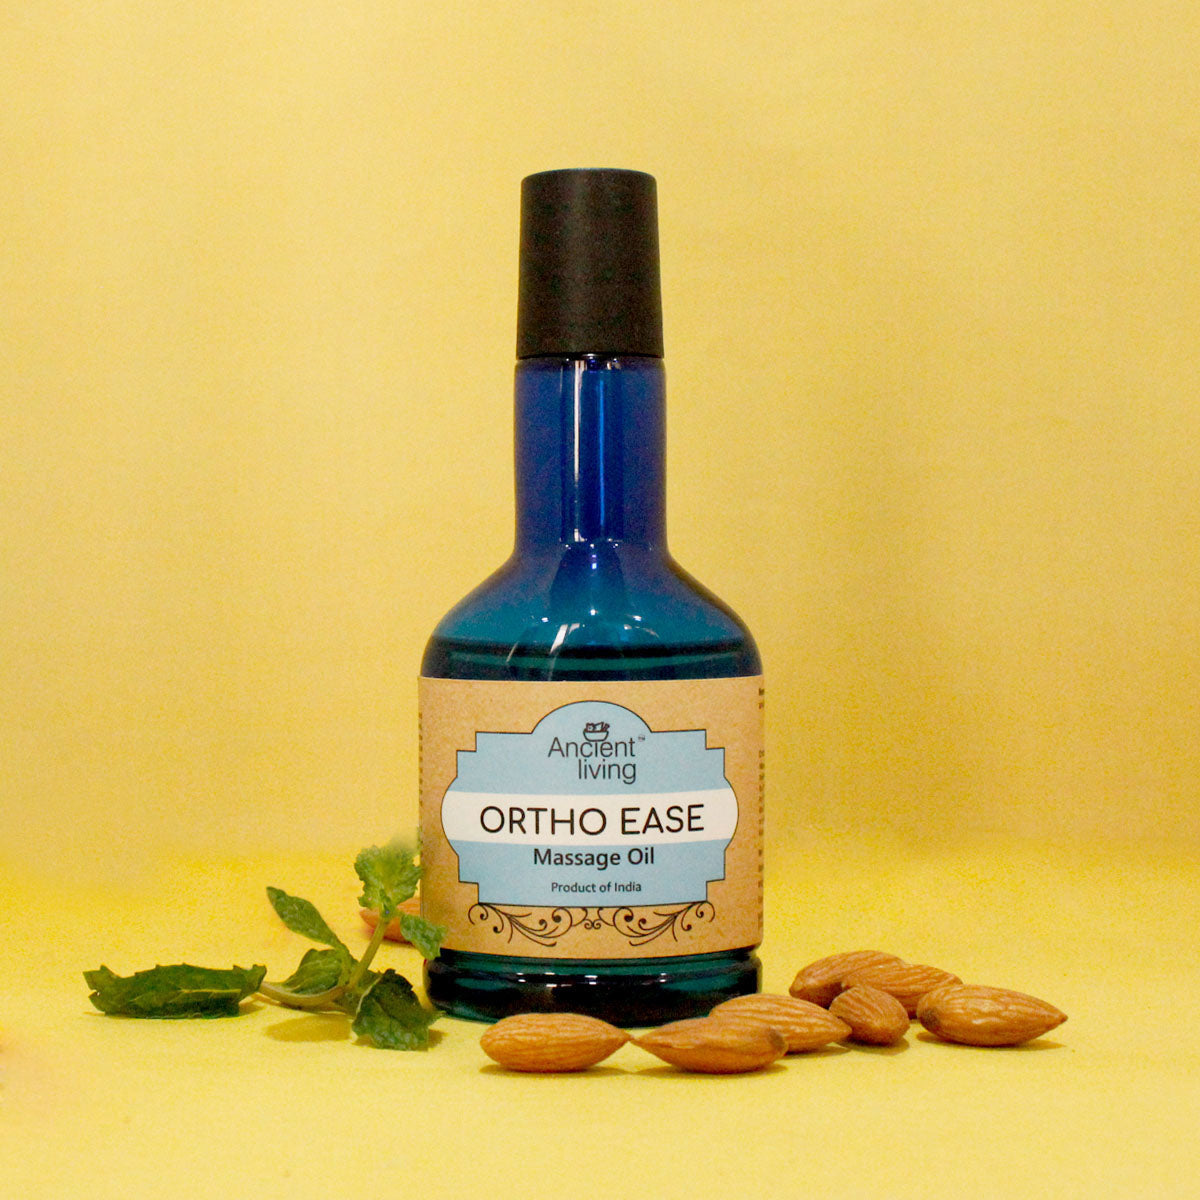 Ortho Ease Massage Oil - Ancient Living